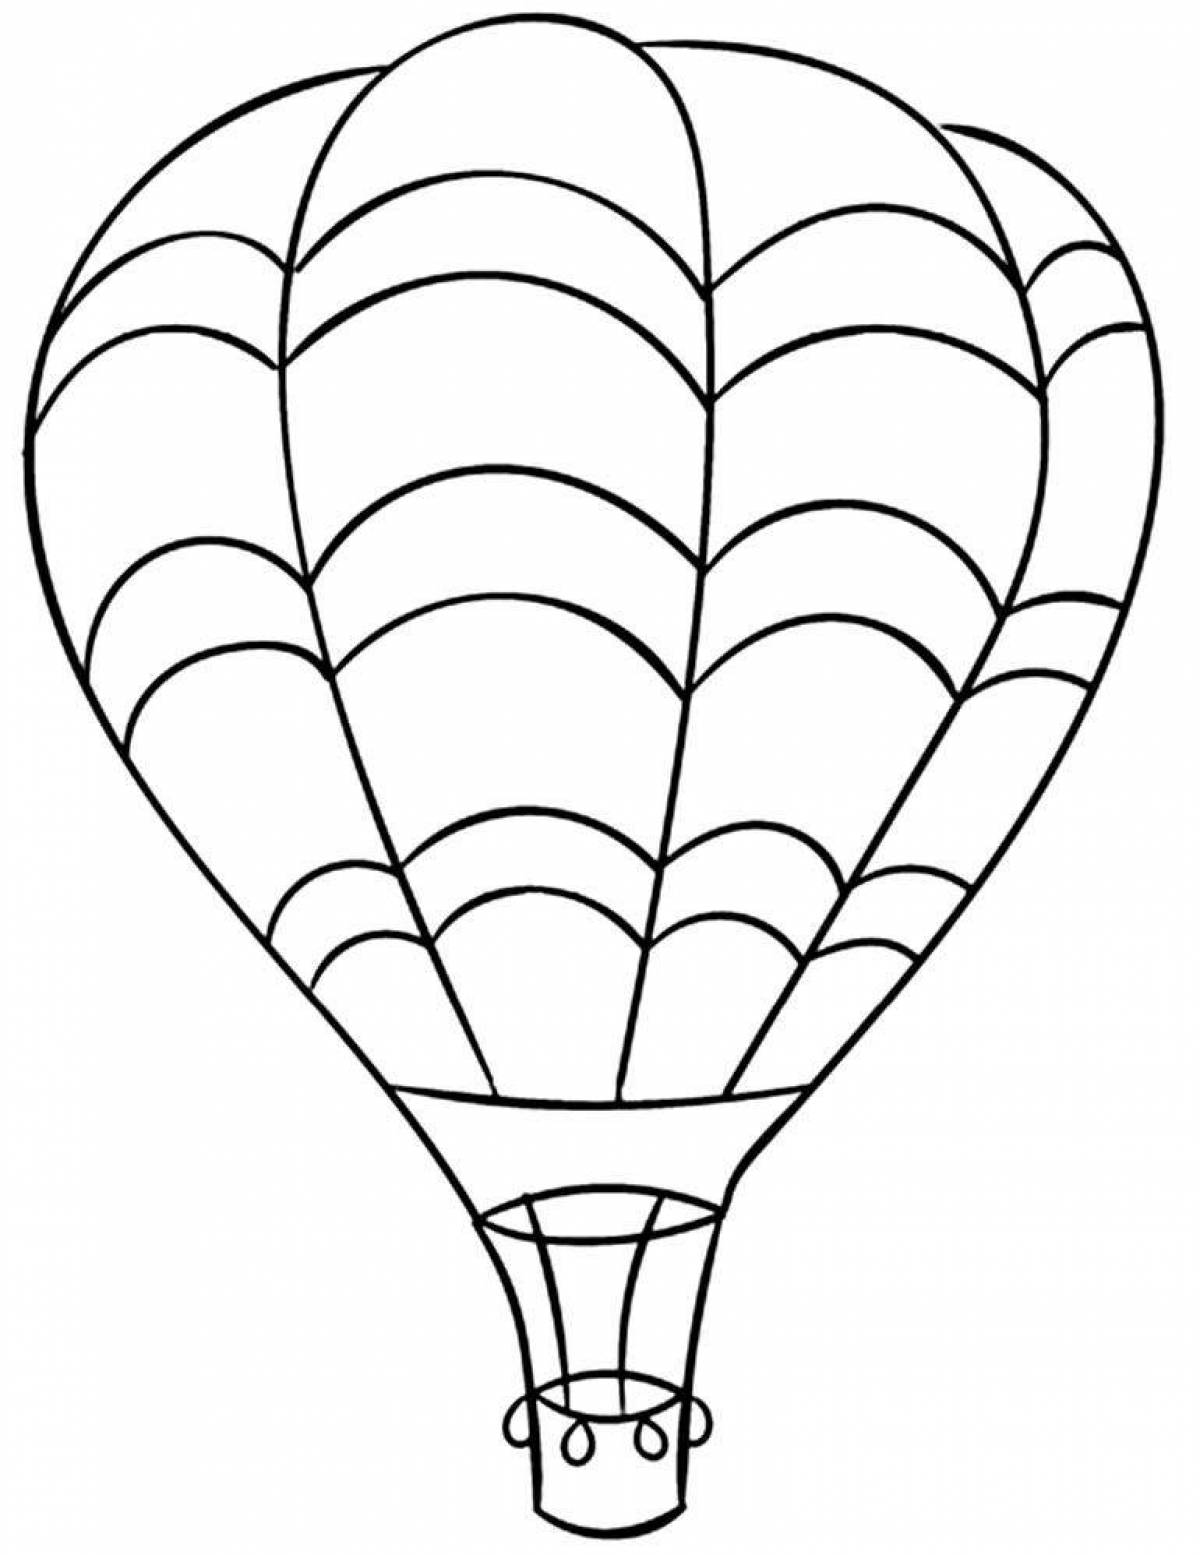 Coloring page nice balloon with a basket